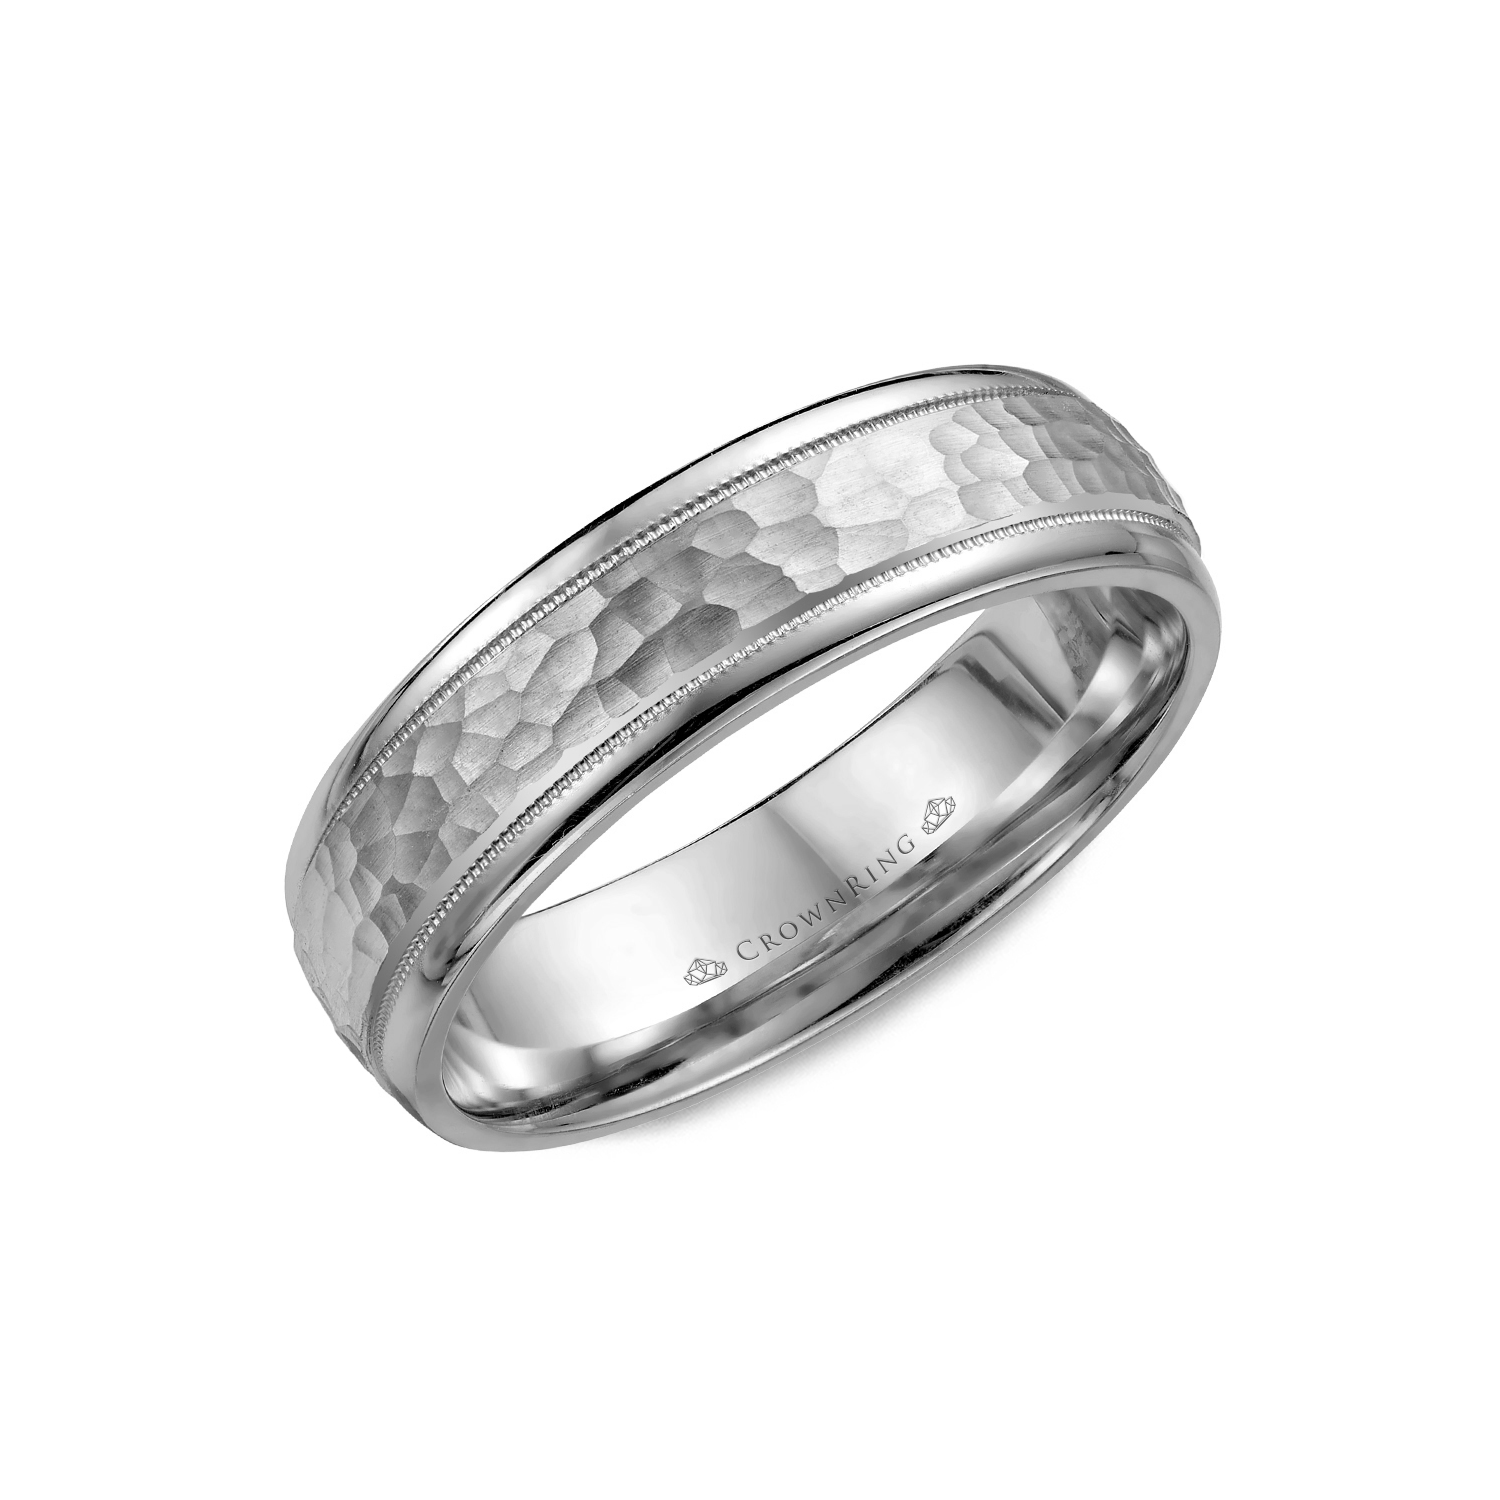 6mm Classic Wedding Band Frosted Hammered Center & High Polish Edges